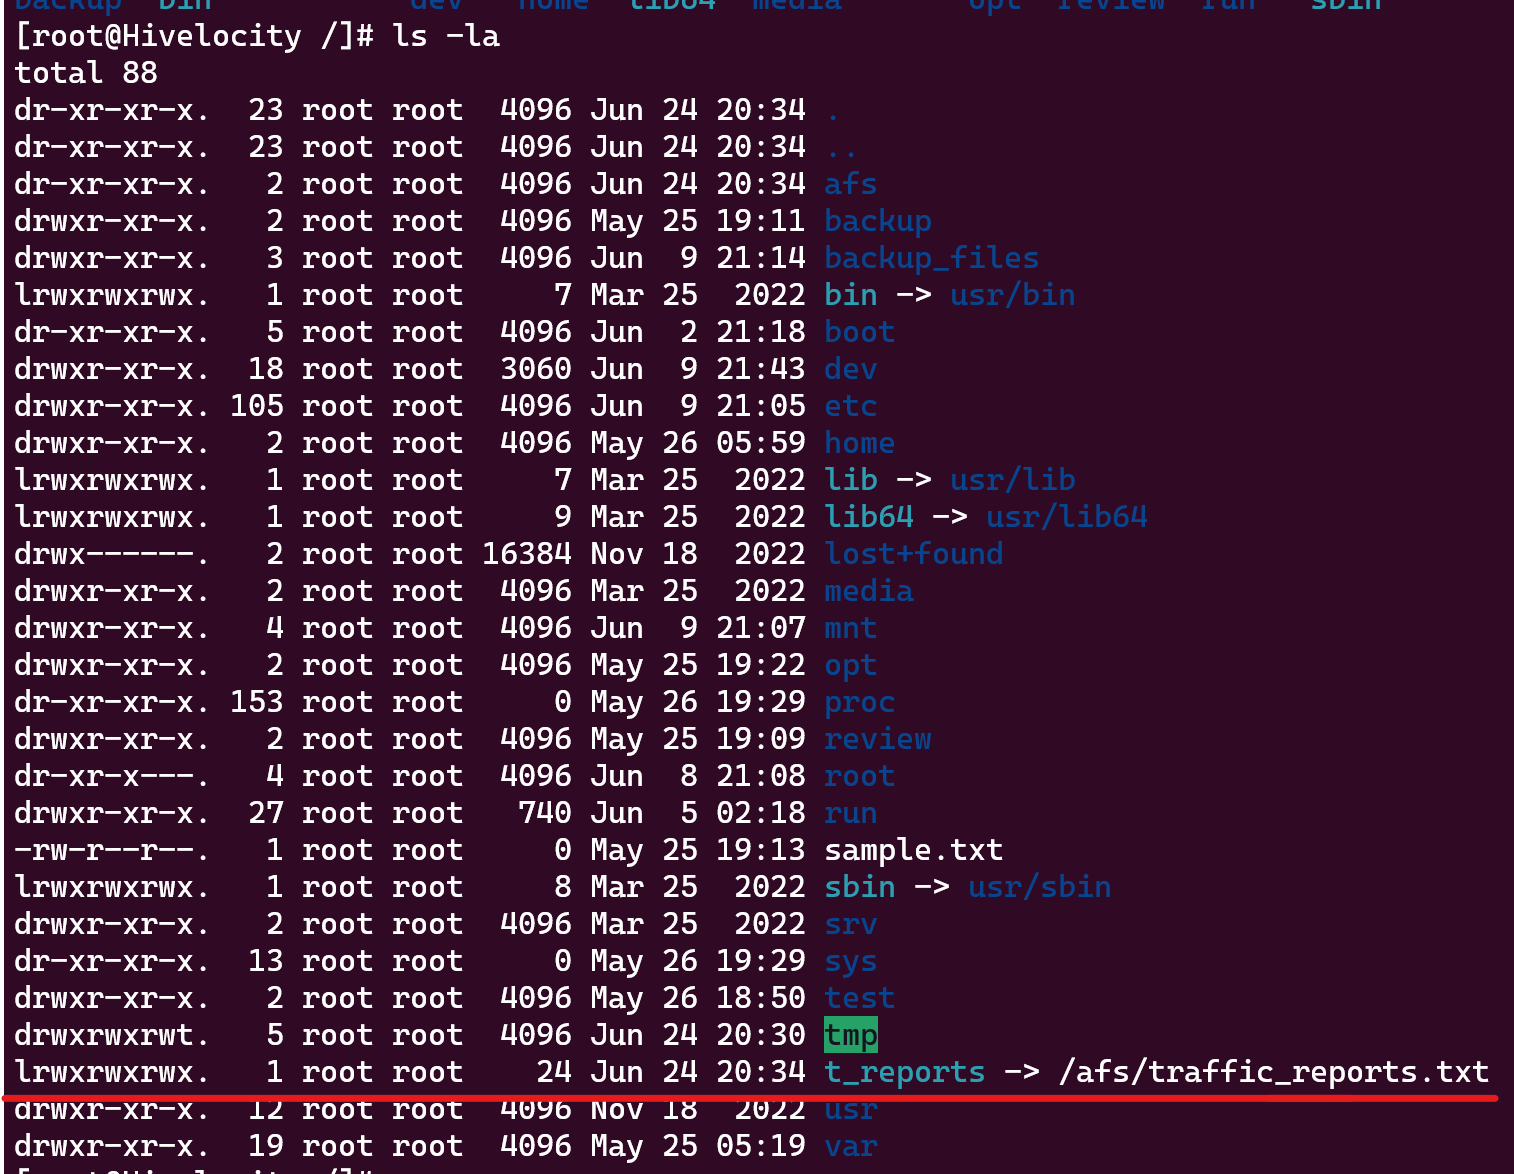 Screenshot showing the results of the ln -s /afs/traffic_reports.txt /t_reports command.